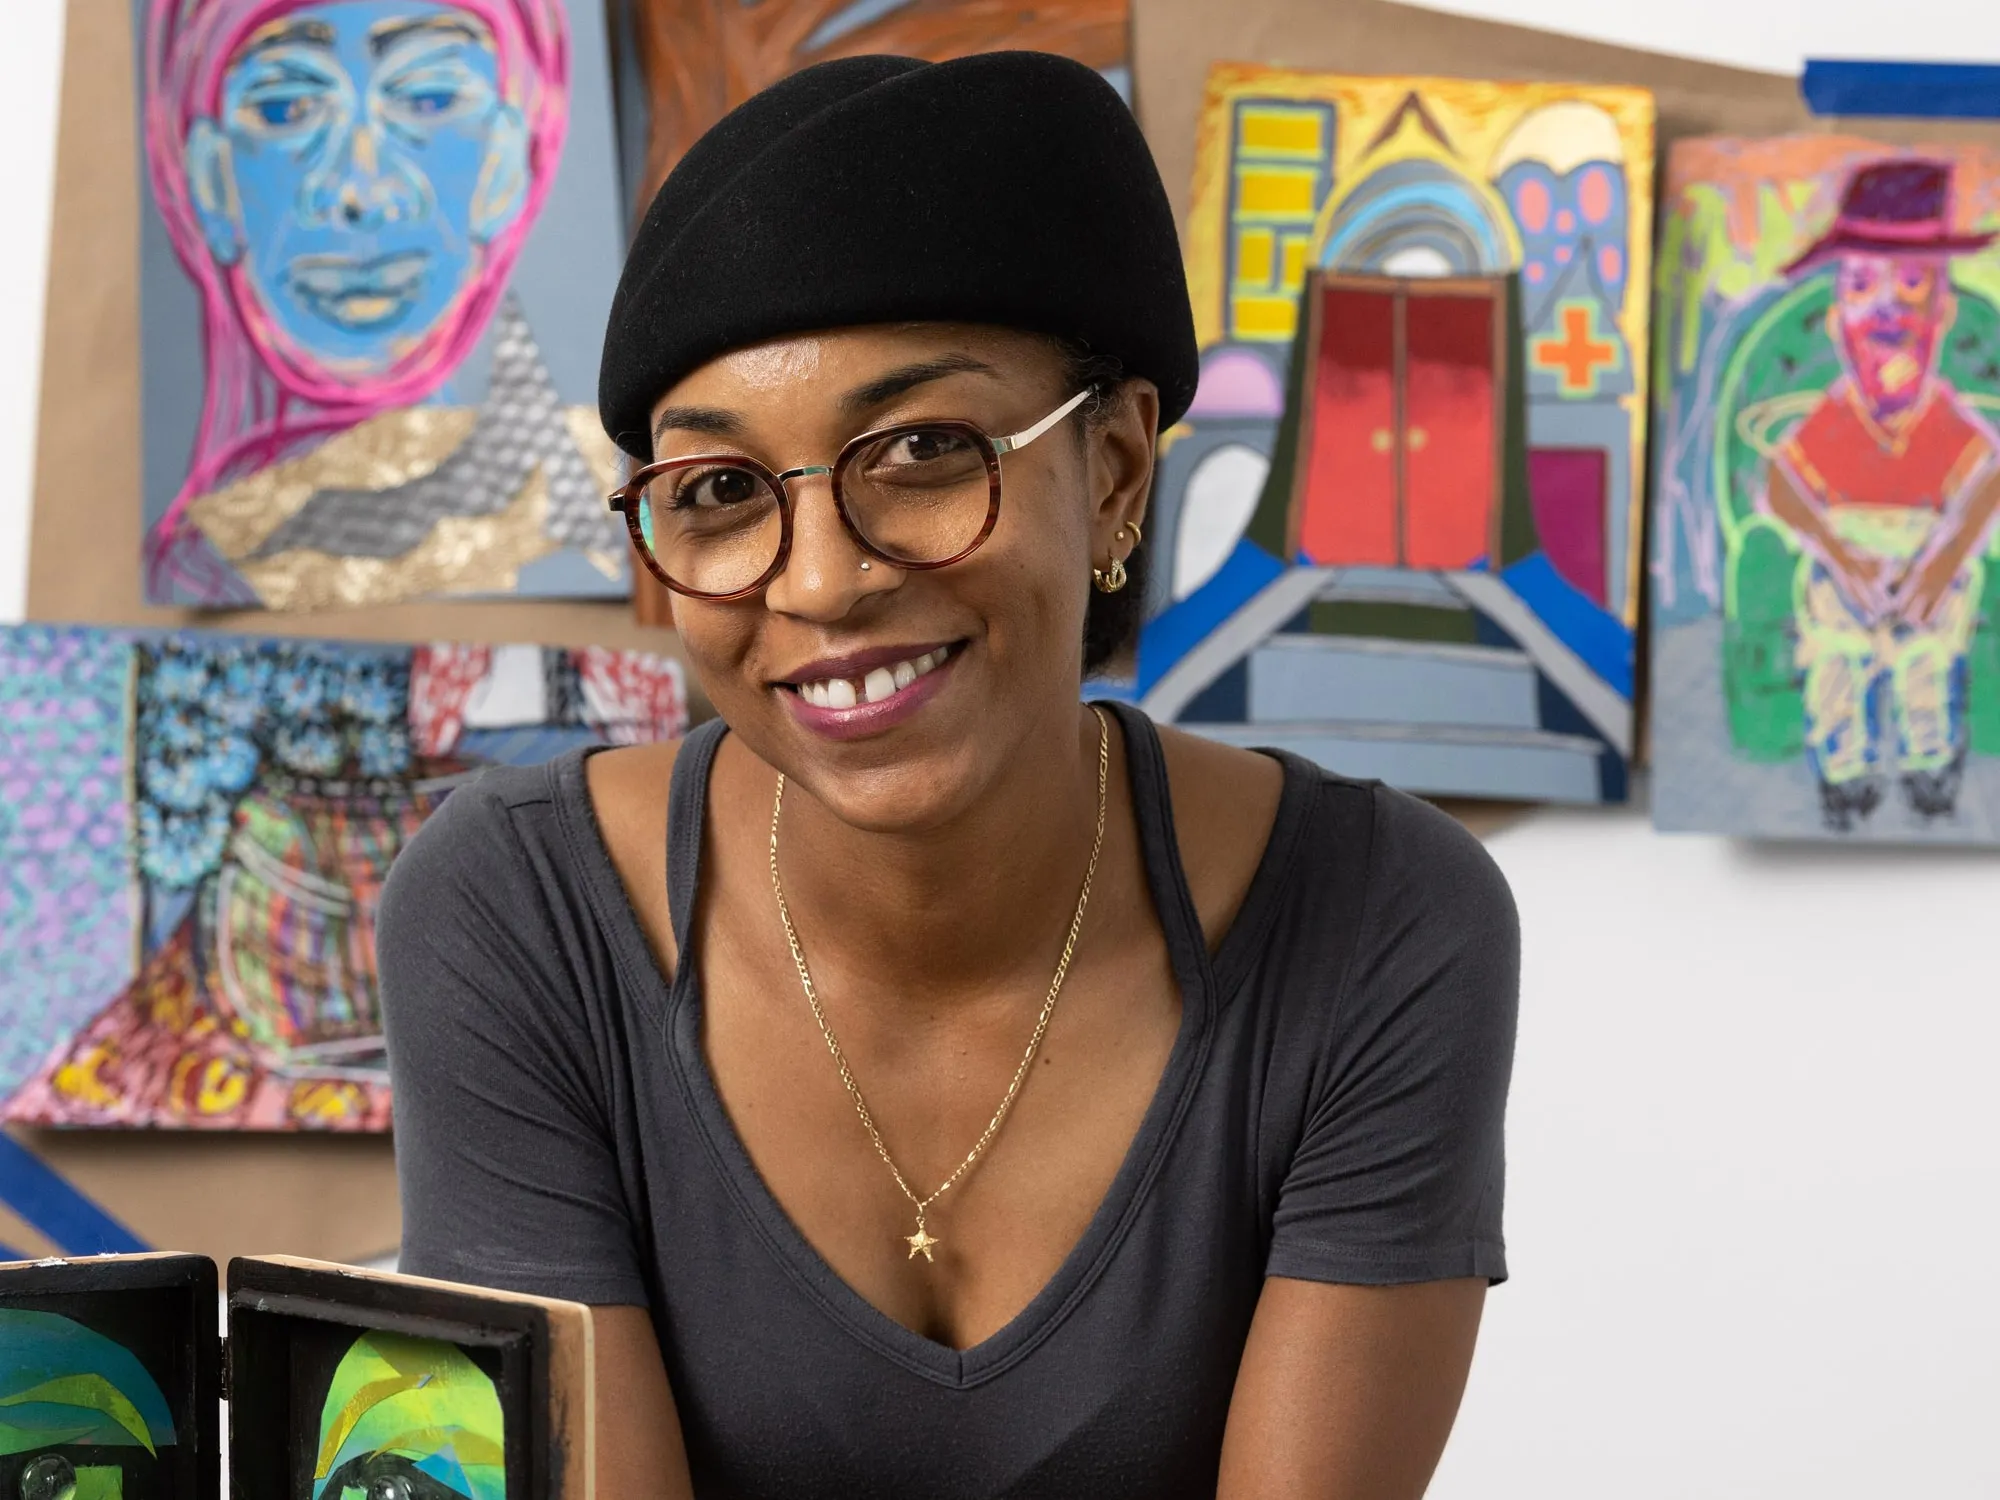 Tiffany Lawson, a Black woman wearing a hat, round glasses and a friendly smile, leans on her work table. In front of her are all kinds of supplies and works in progress and on the wall behind her are paintings she created on paper bags. They include people, faces and scenes in unexpected colors. 